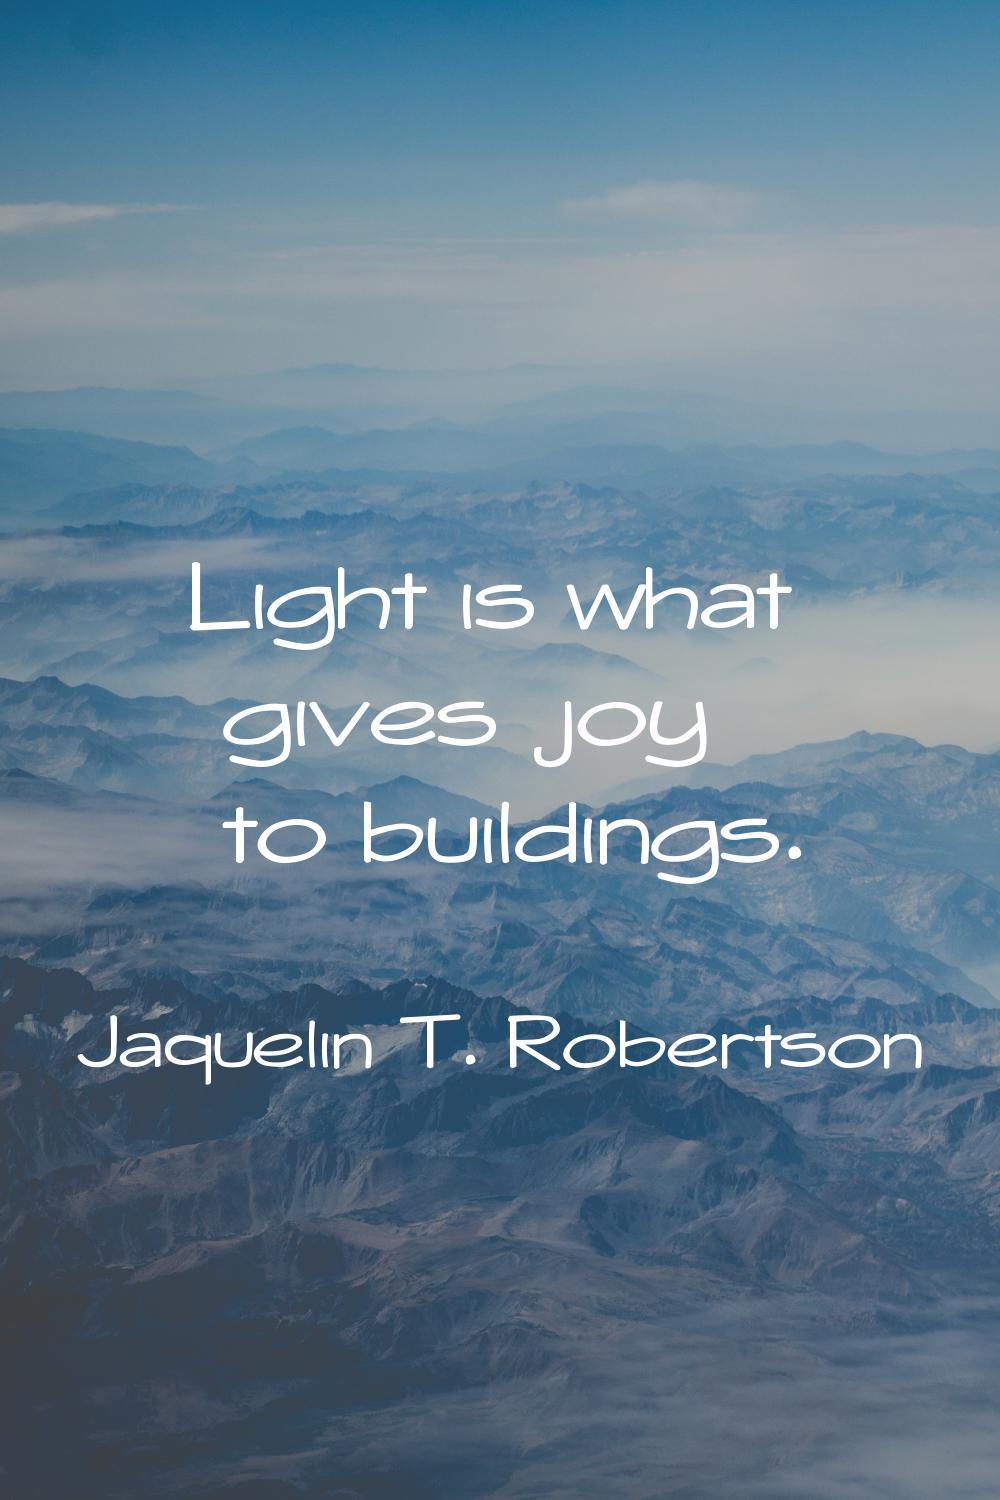 Light is what gives joy to buildings.